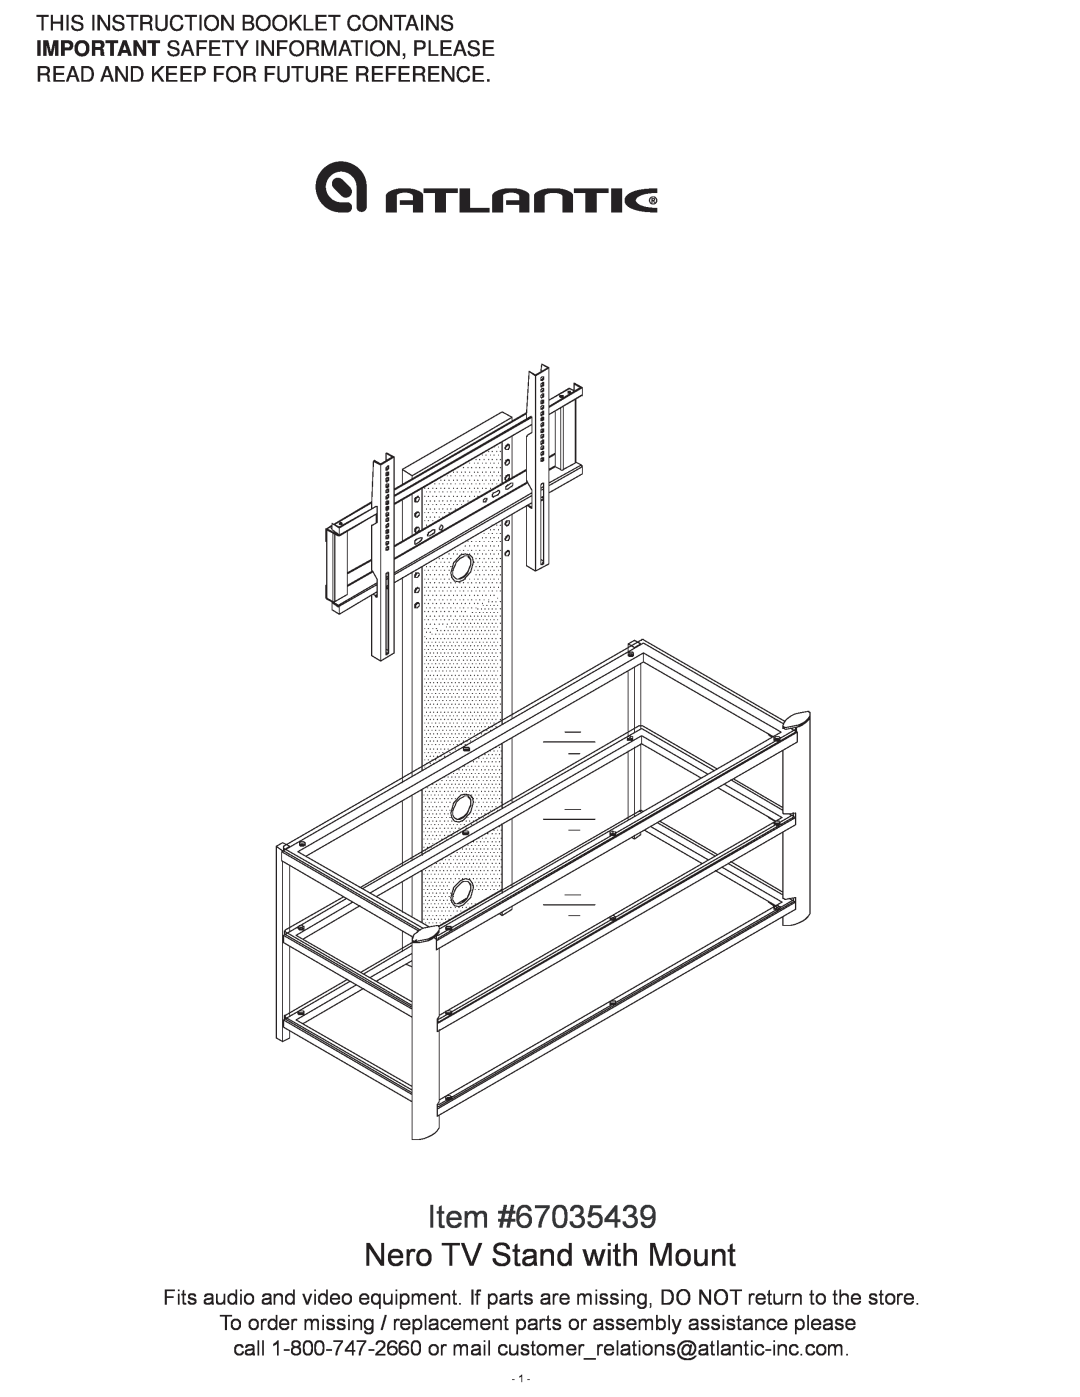 Atlantic manual Item #67035439 Nero TV Stand with Mount, This Instruction Booklet Contains 